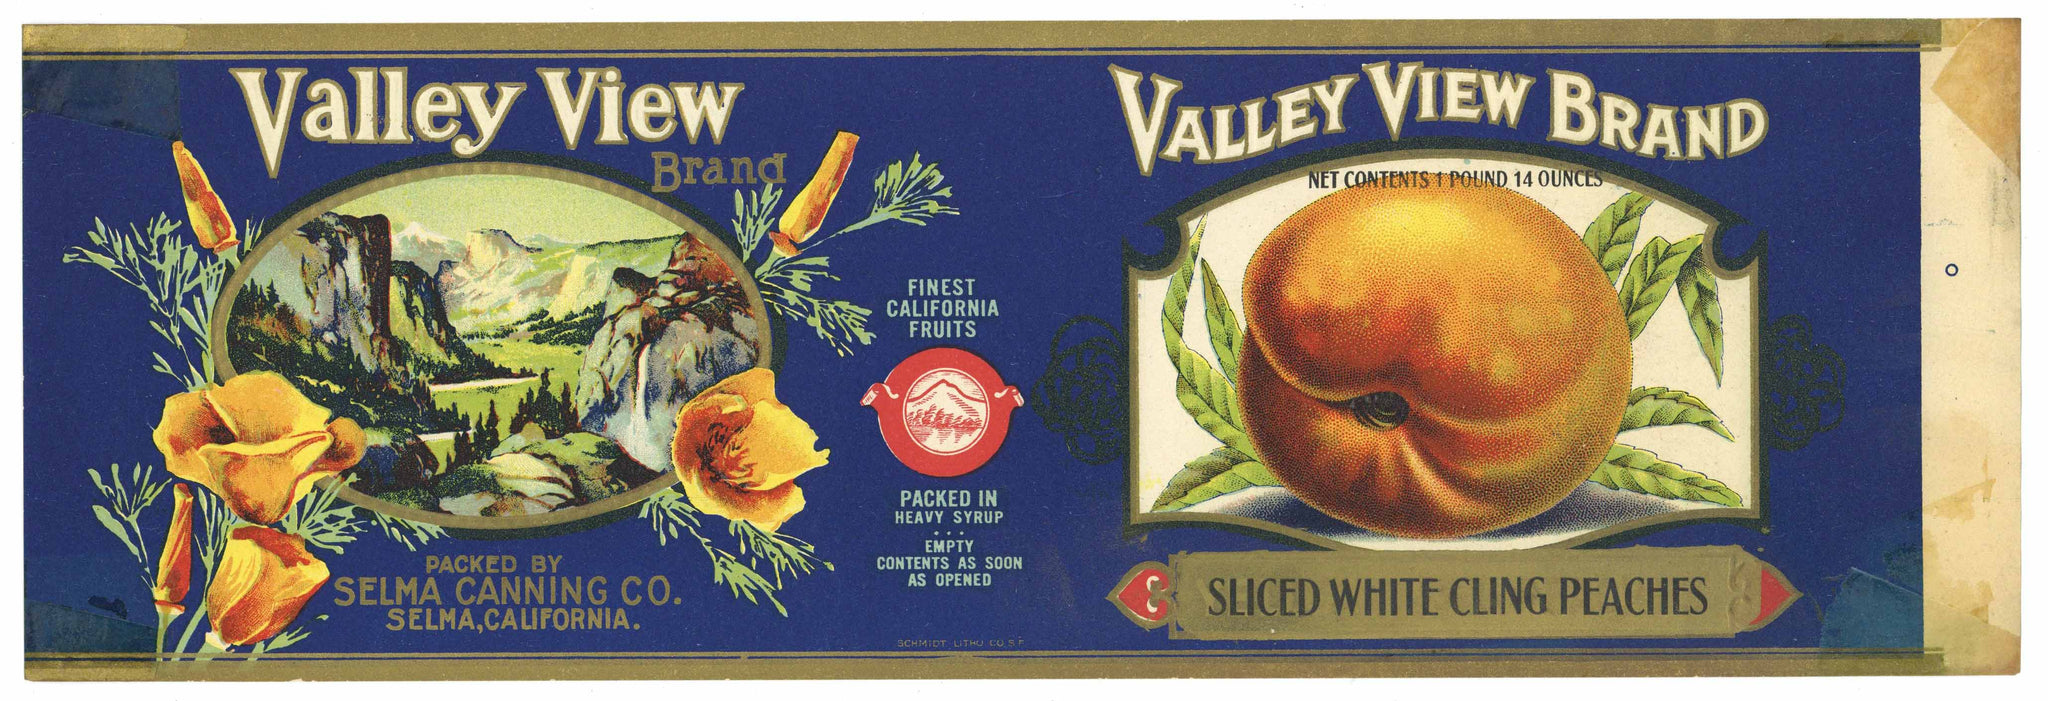 Valley View Brand Vintage Peach Can Label